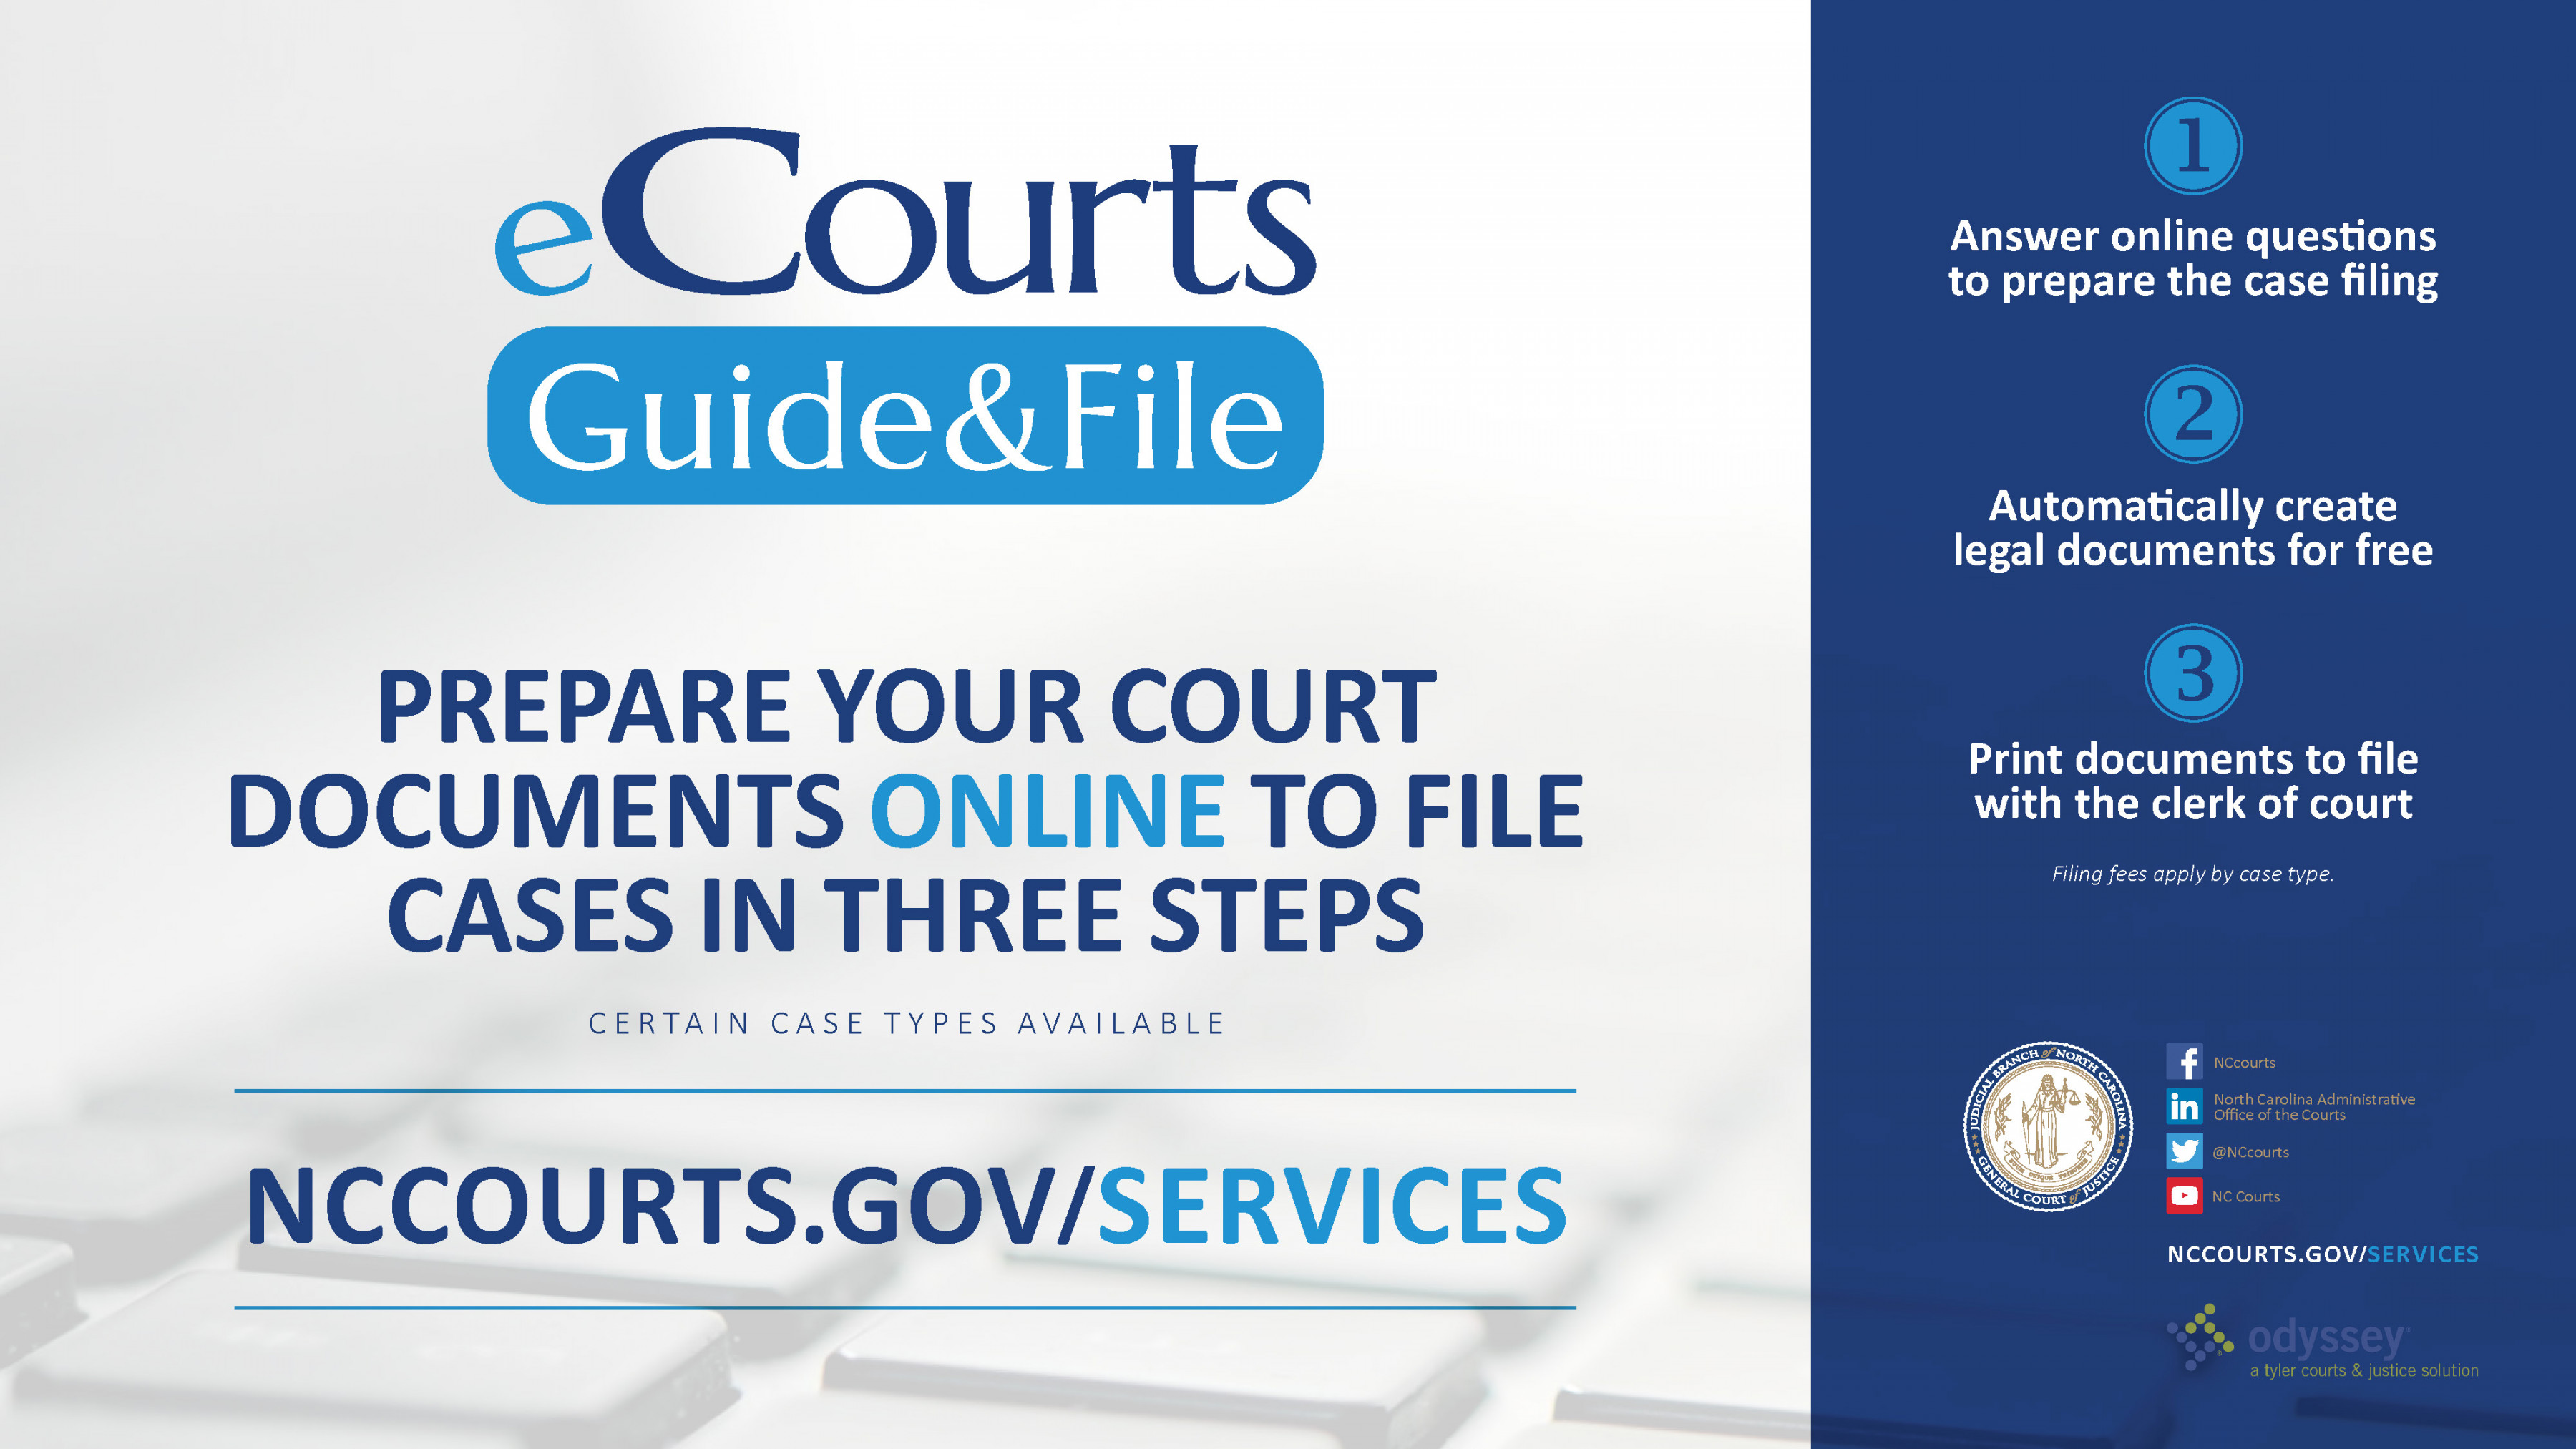 North Carolina Court System Launches Free, Online Document